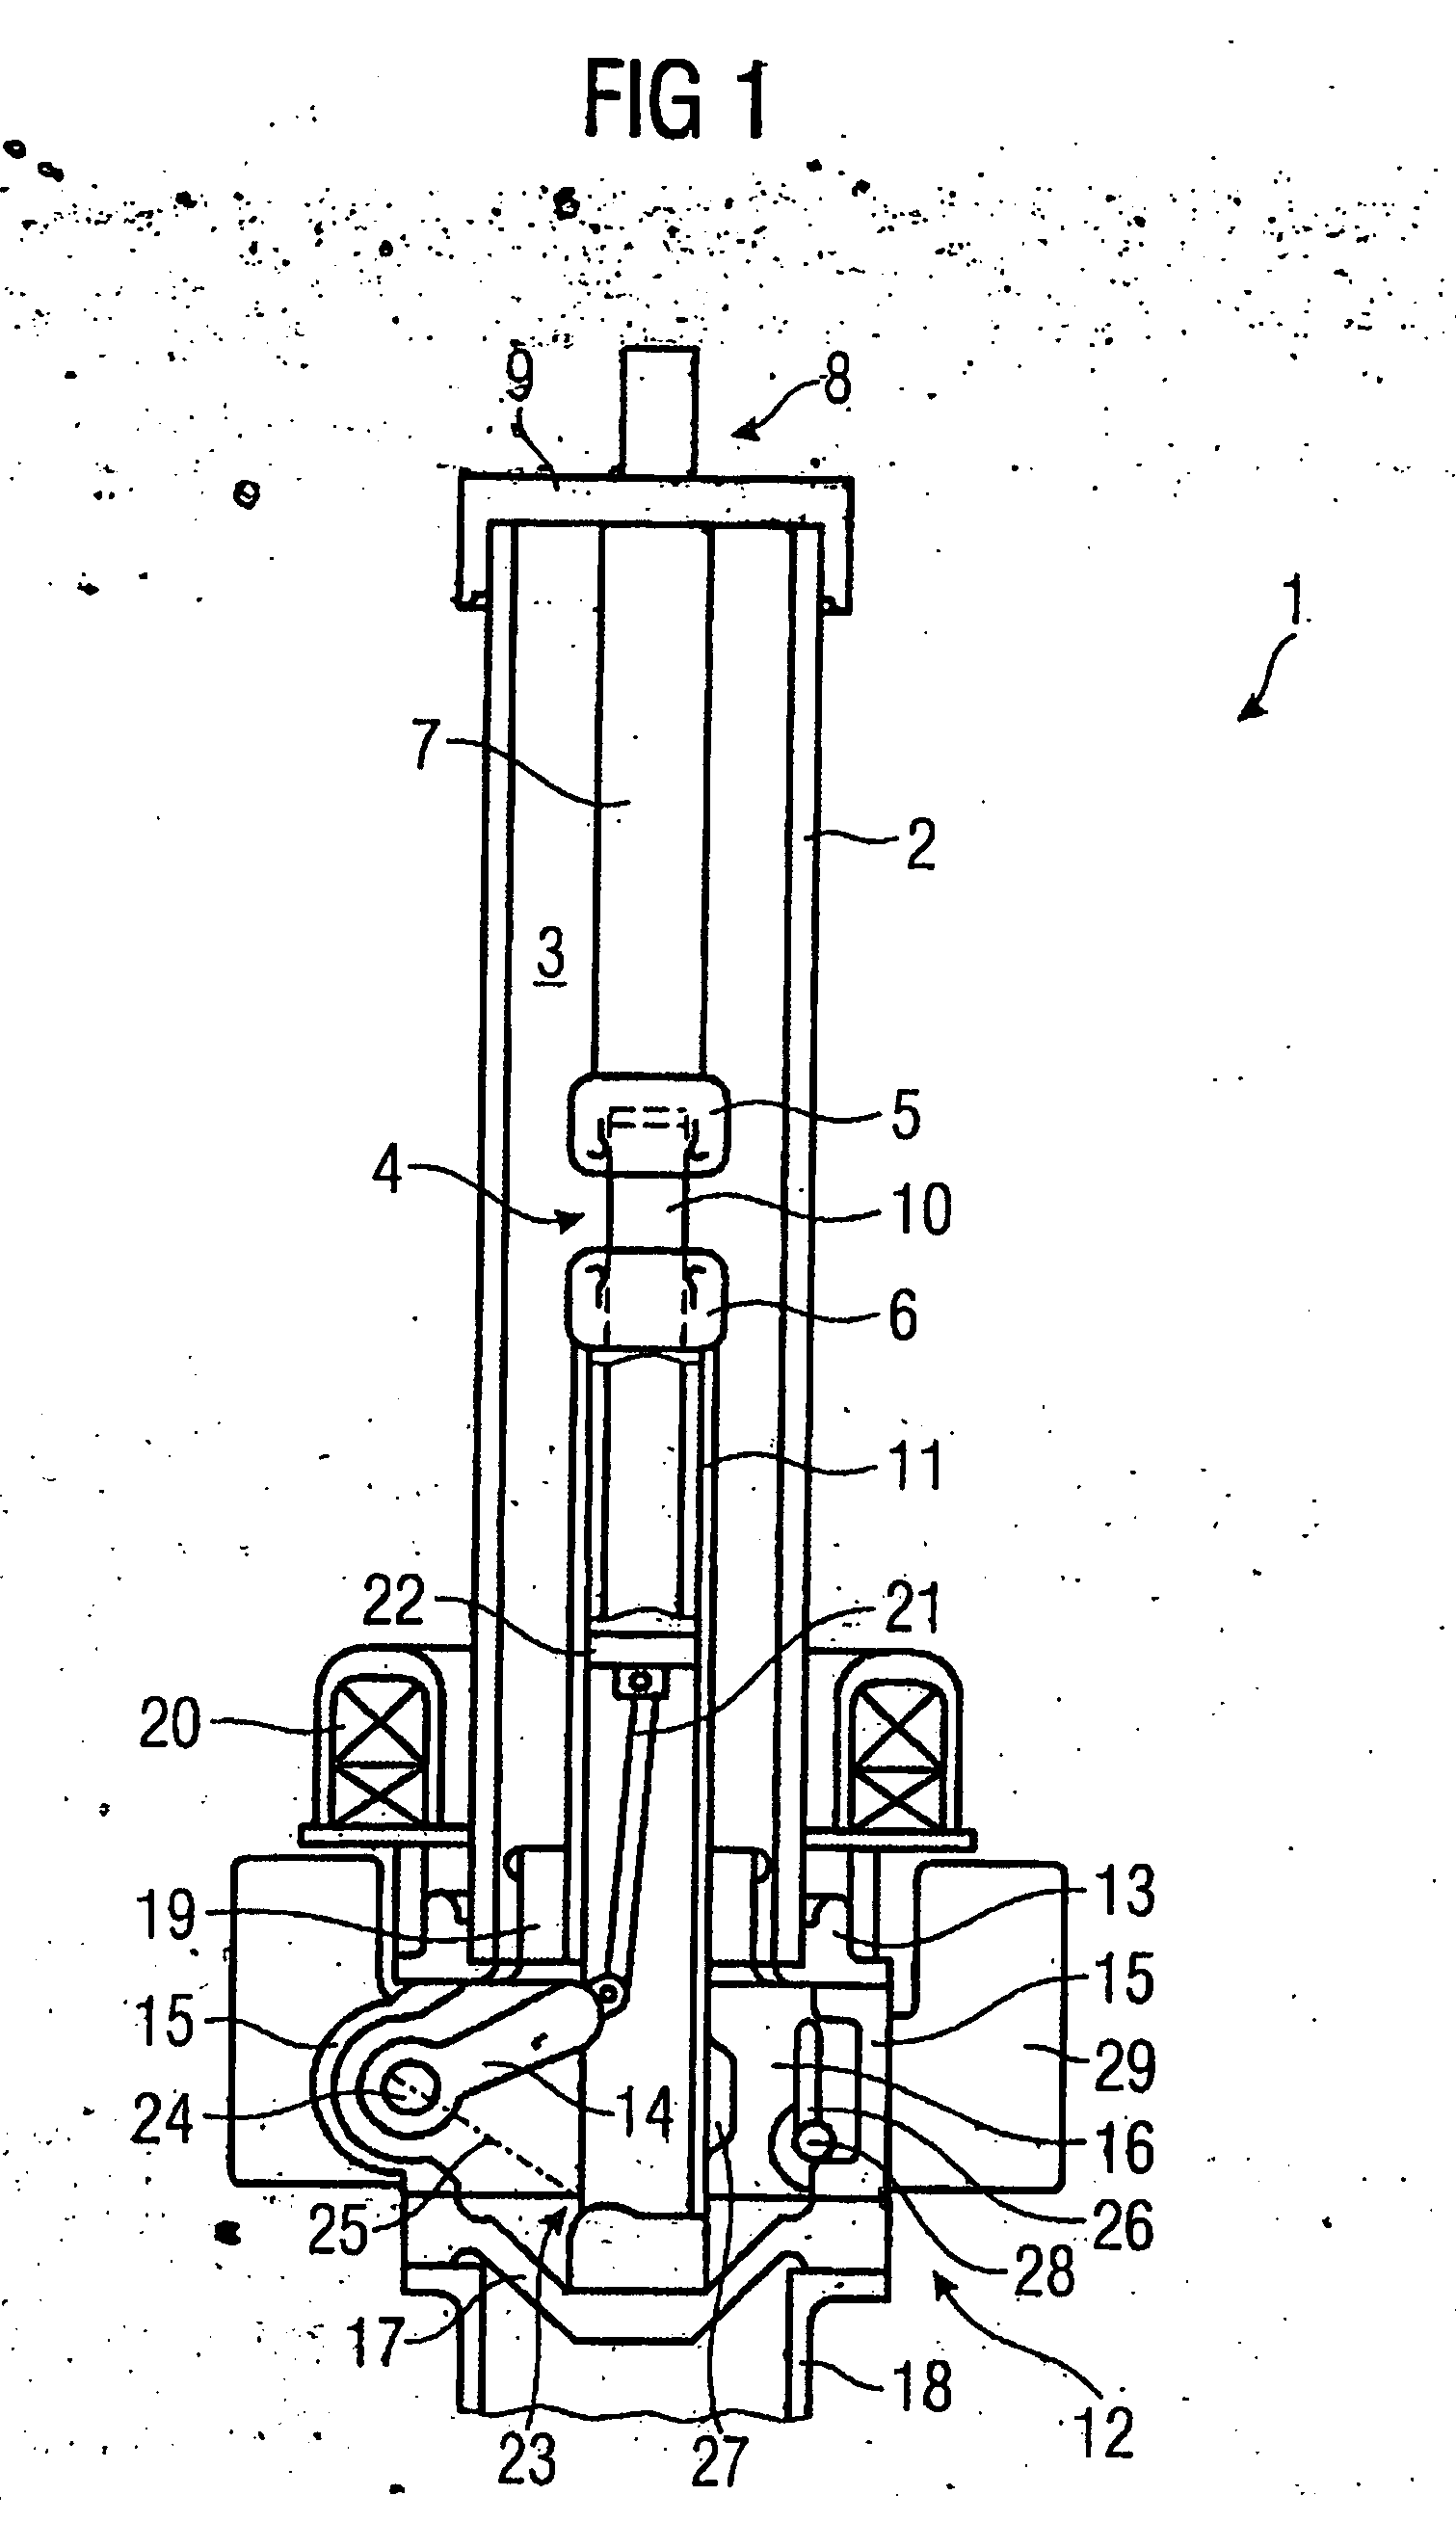 Outdoor bushing comprising an integrated disconnecting switch